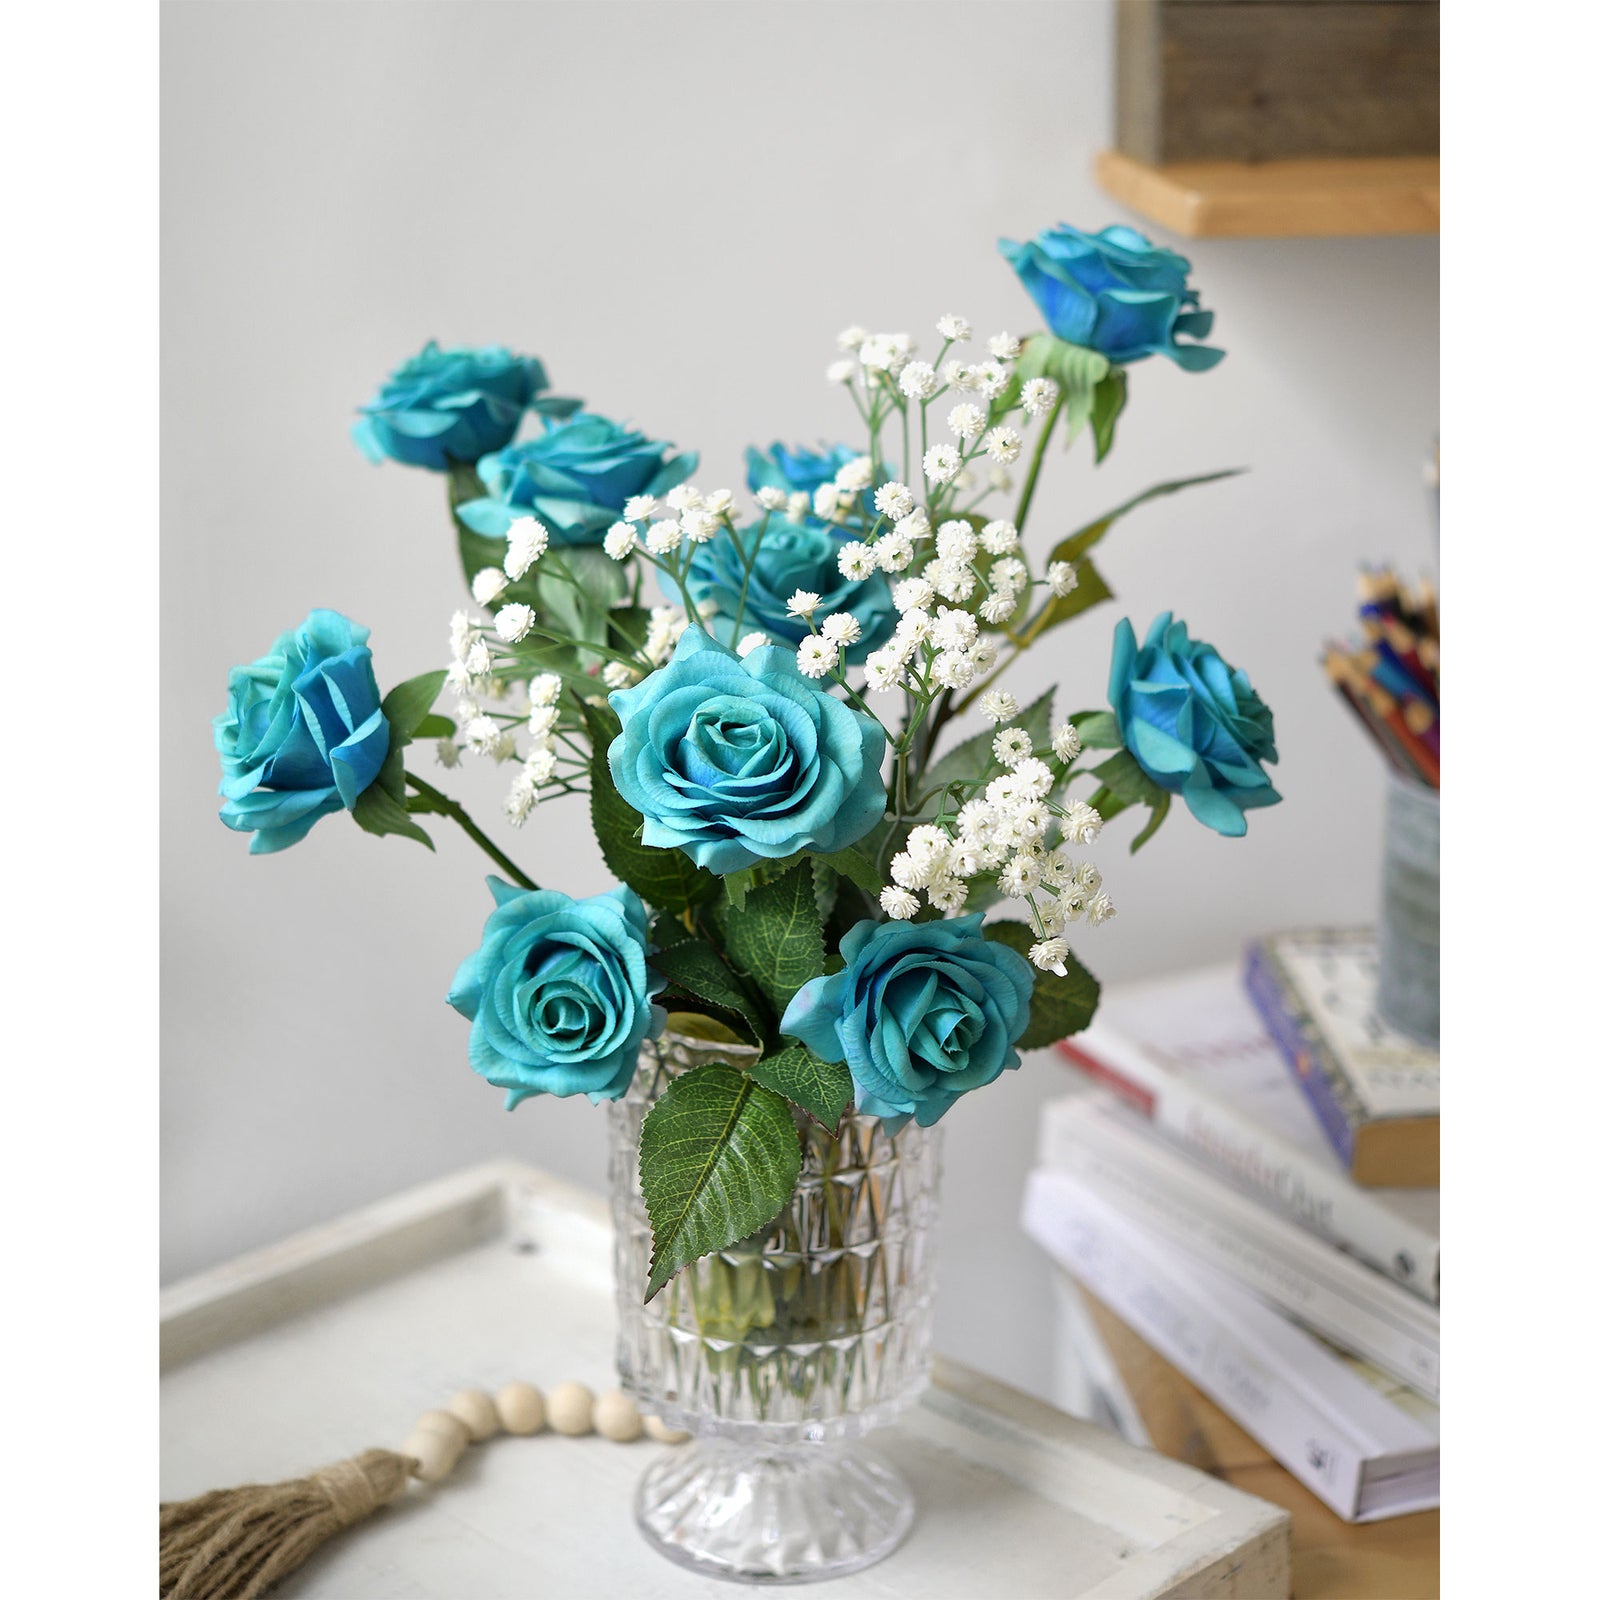 ''Caribbean'' Rose Bouquet Artificial Flowers for Corporate Gifting, Business Gifts , and Various Occasions 11 Stems